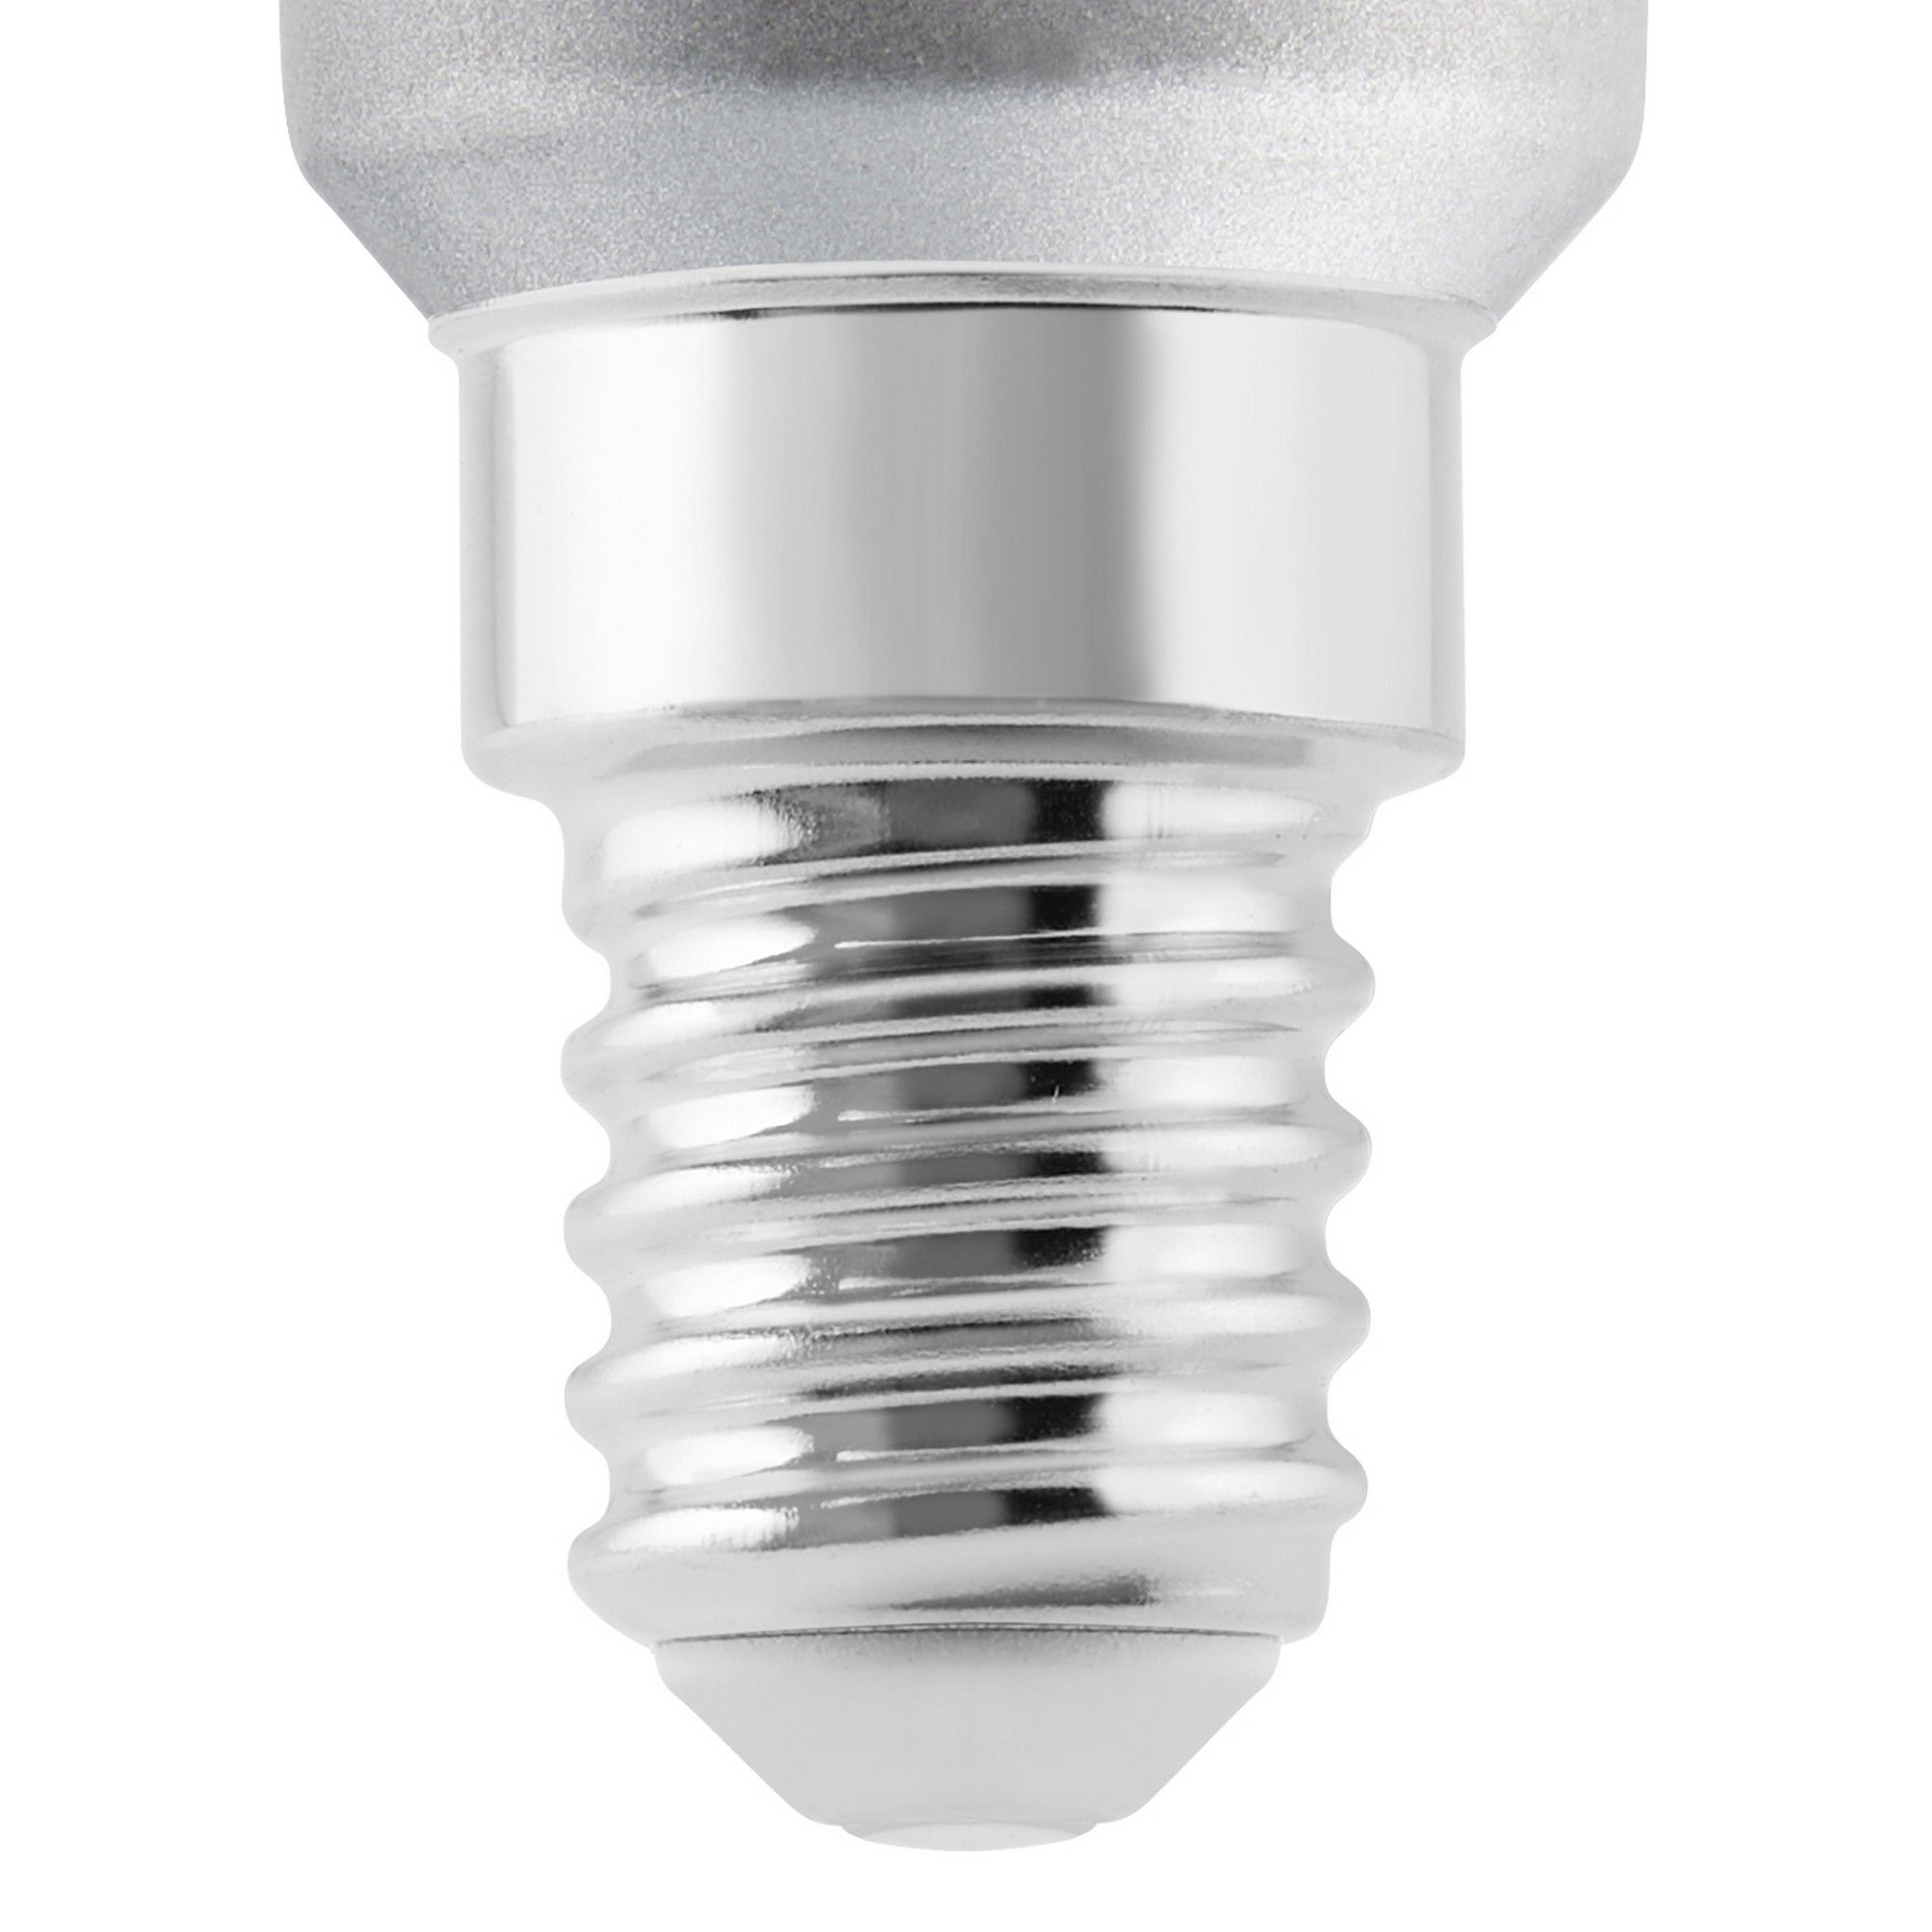 Diall E14 2.9W 325lm Frosted Reflector (R39) Warm white LED Light bulb